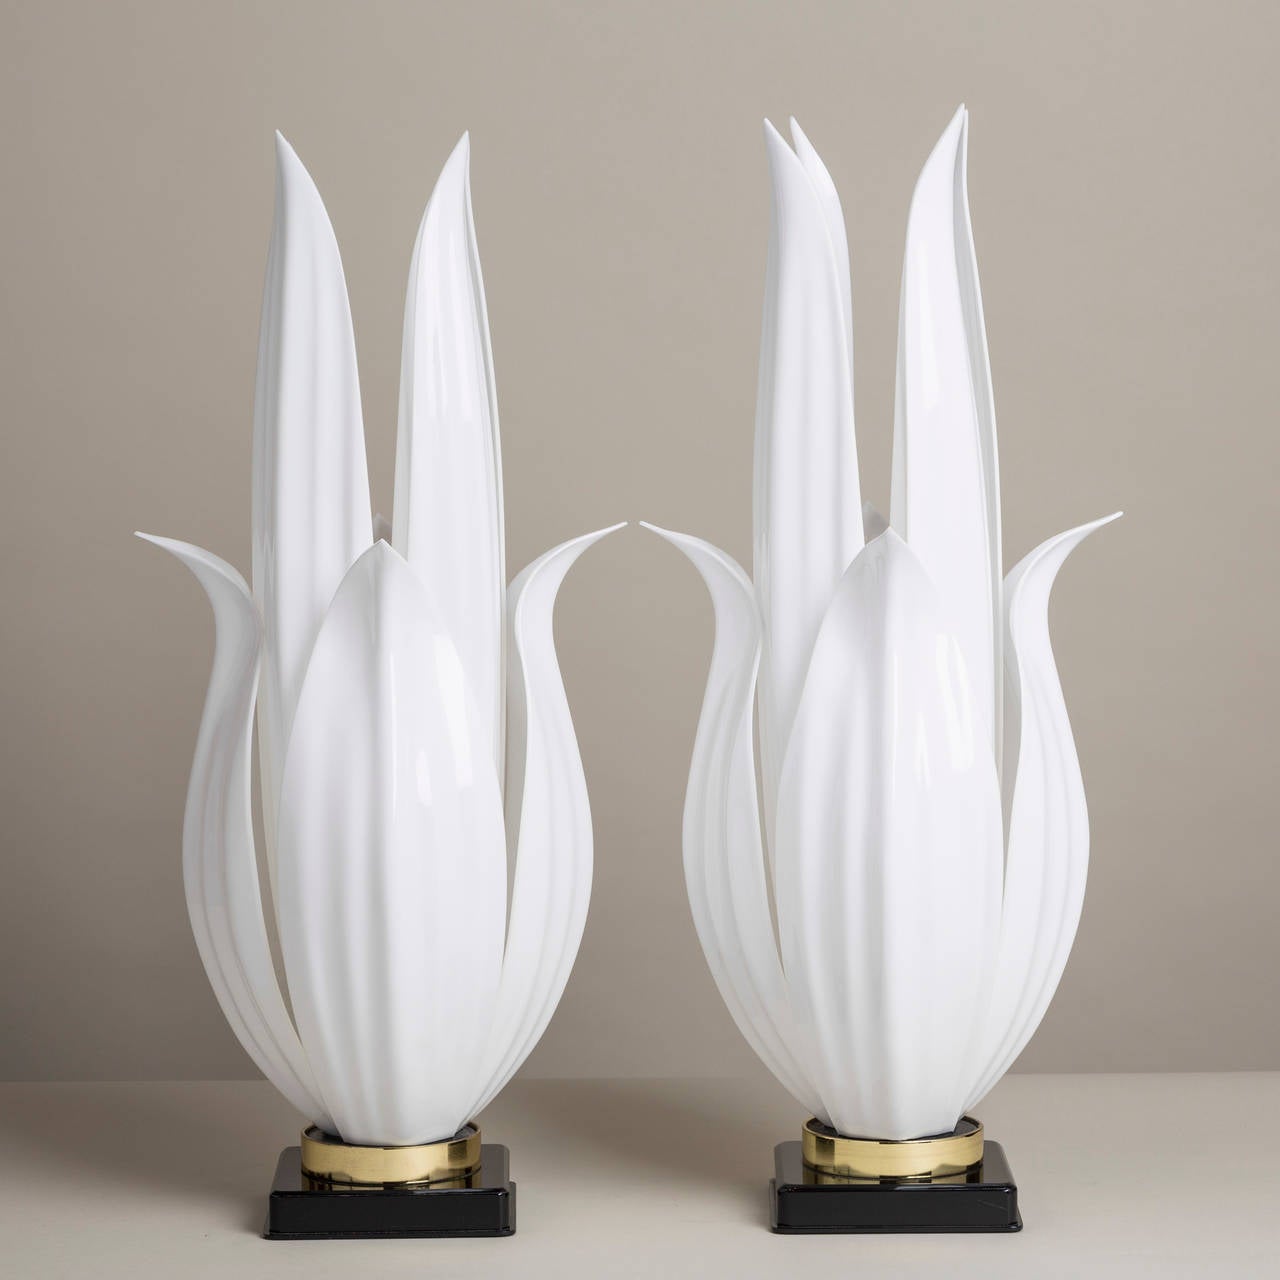 A rare pair of acrylic Rougier designed table lamps Canada, late 1970s.